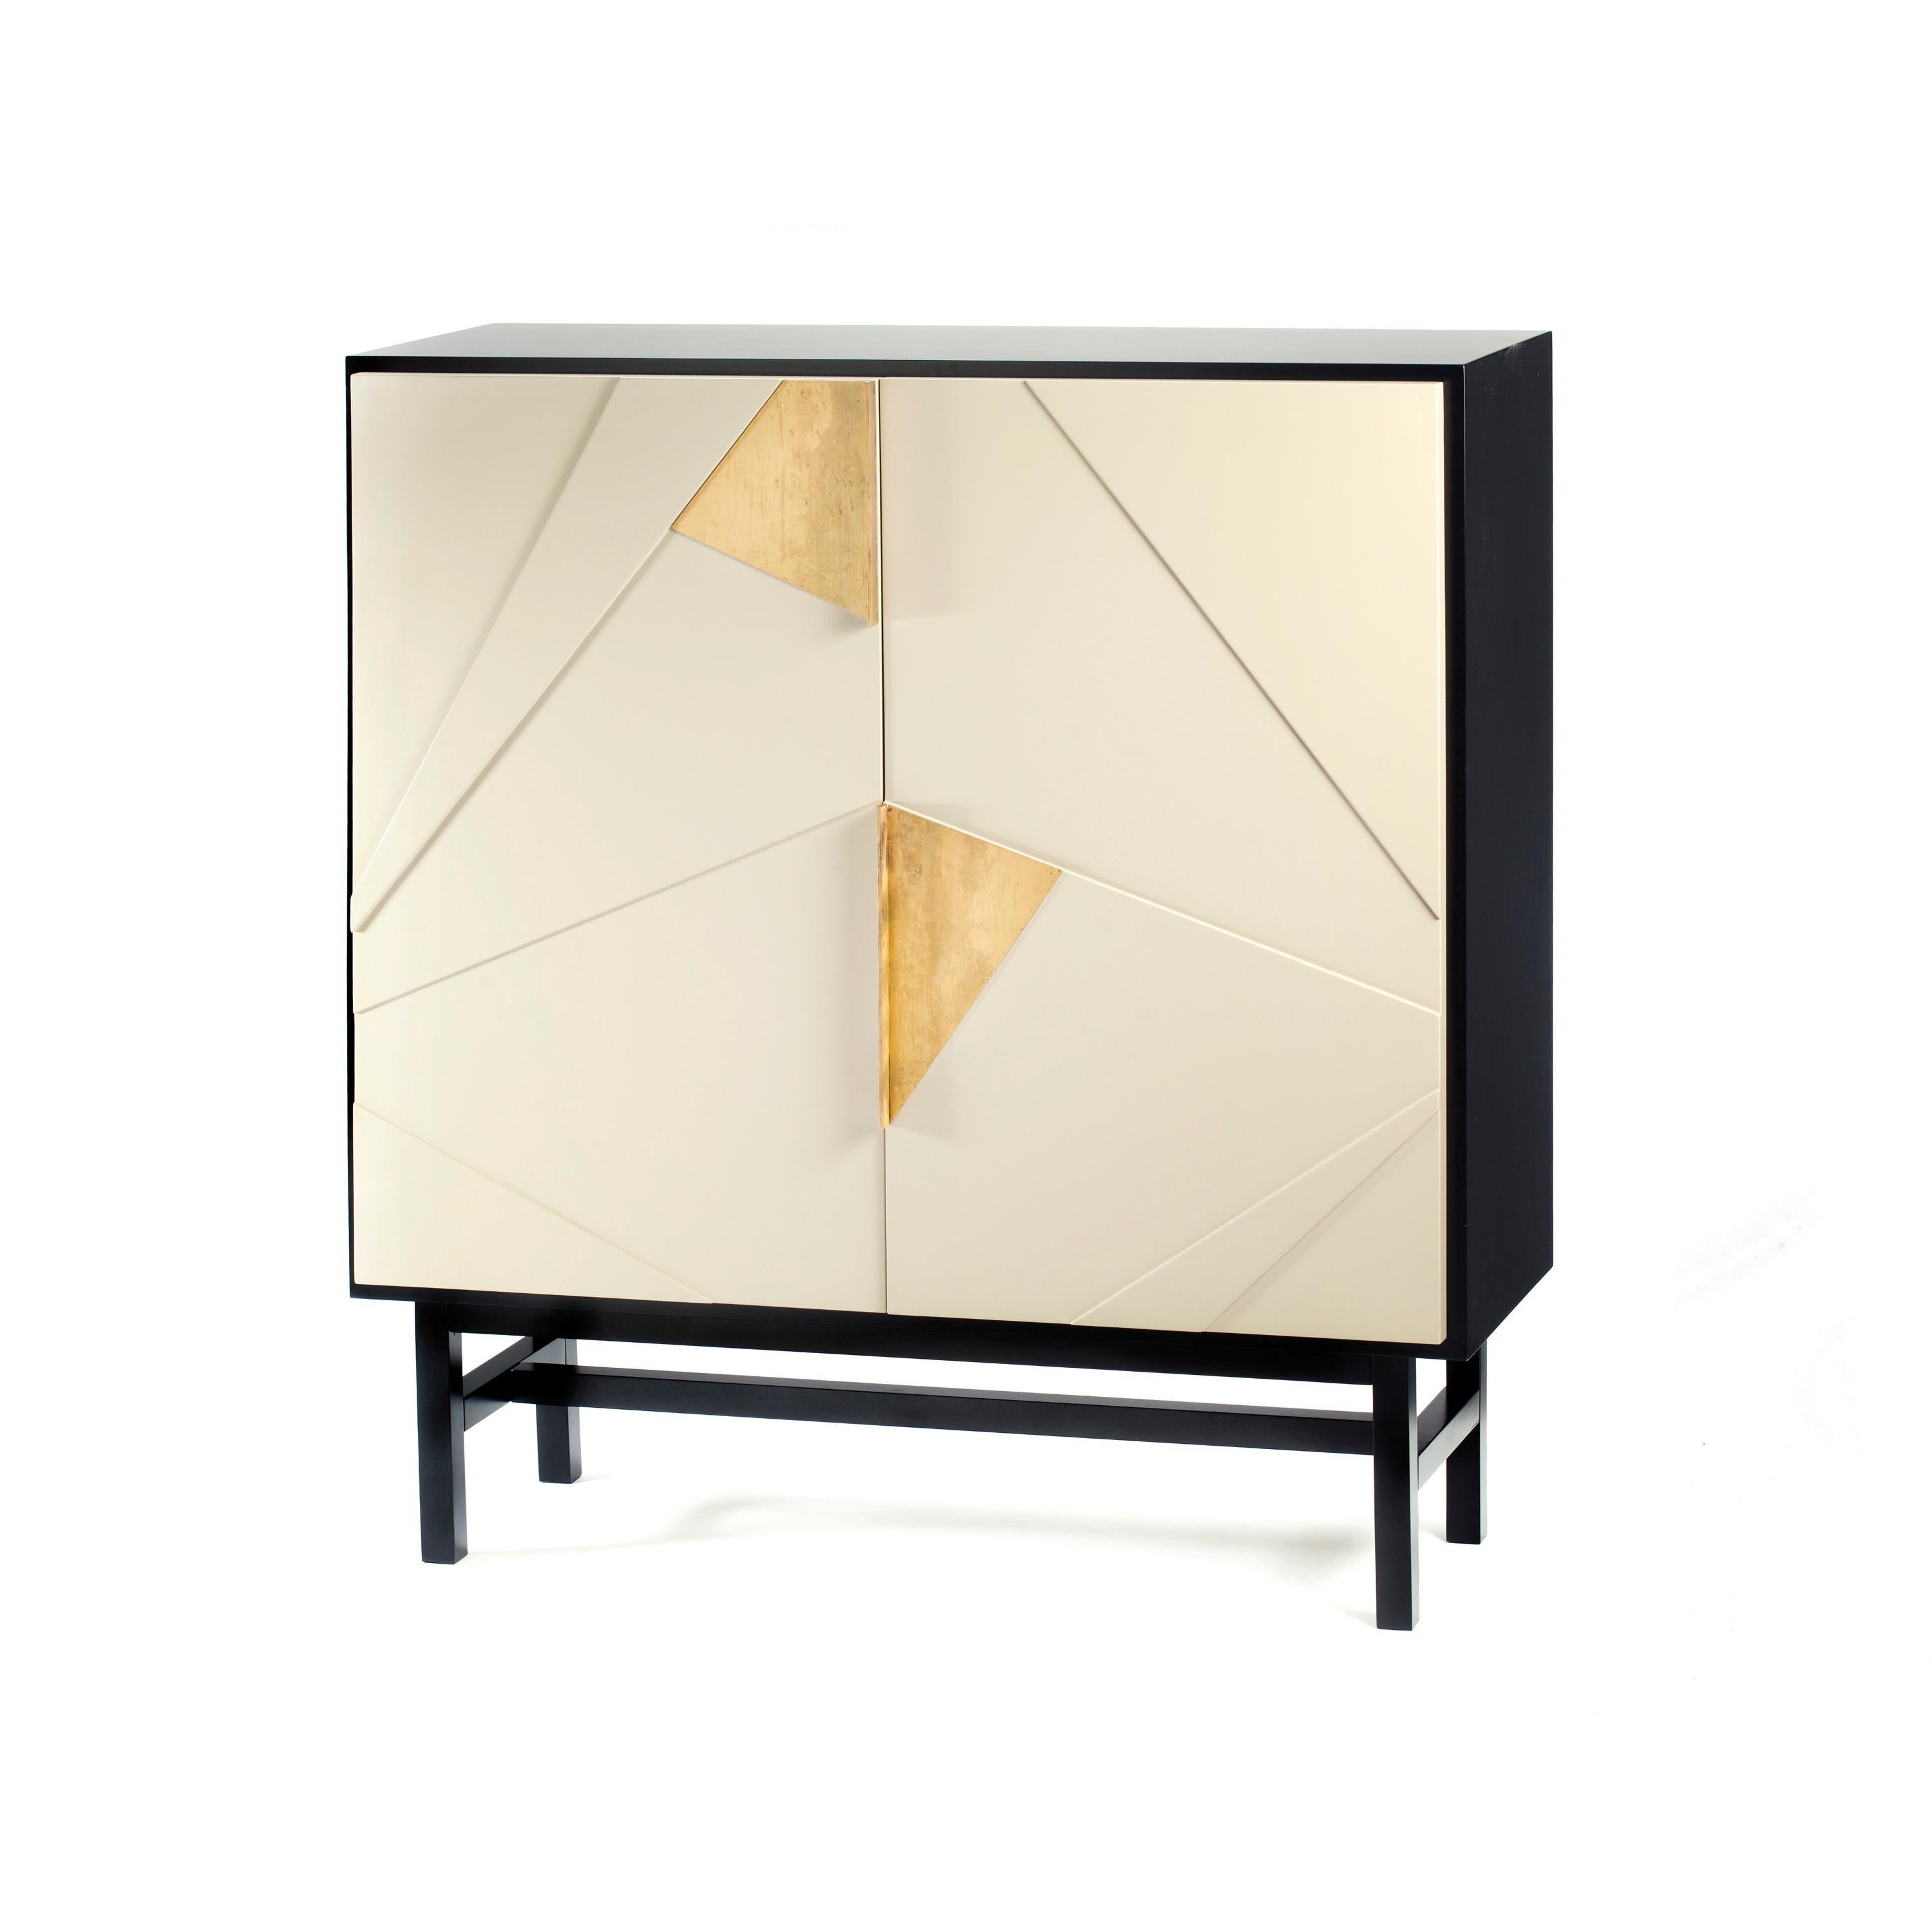 Jazz bar cabinet is a high quality product by Mambo Unlimited Ideas, crafted in polished or matte wood veneer structure and feet, brass applications and lacquered doors. It features three dimensional designs on its doors, elegant oxidized brass